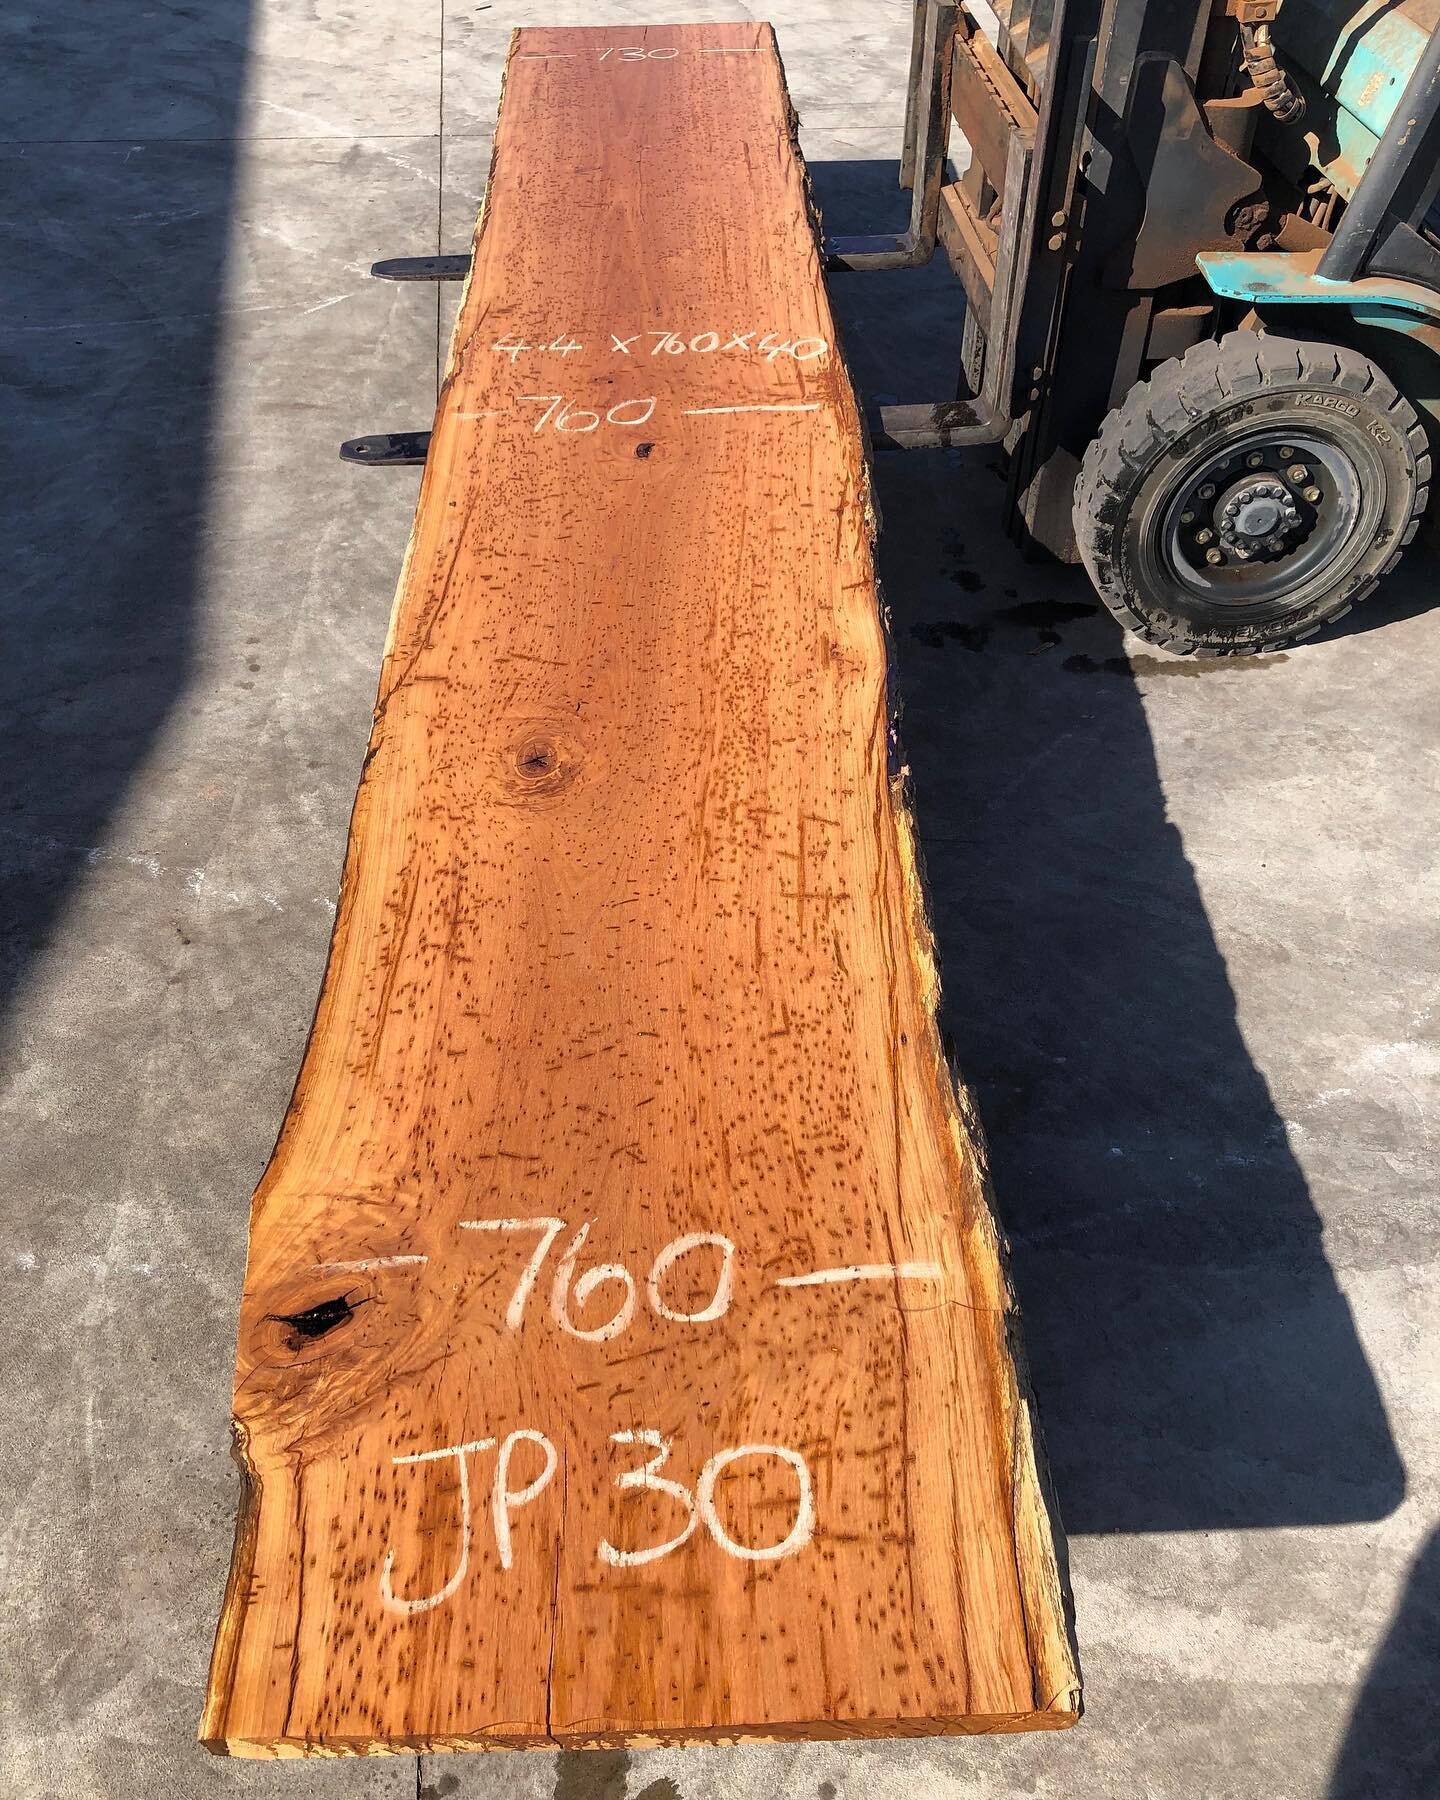 Monster Blackbutt slab coming in at 4.4m! Beautiful featured piece ready to go. 

760 x 4400 x 40, $1350